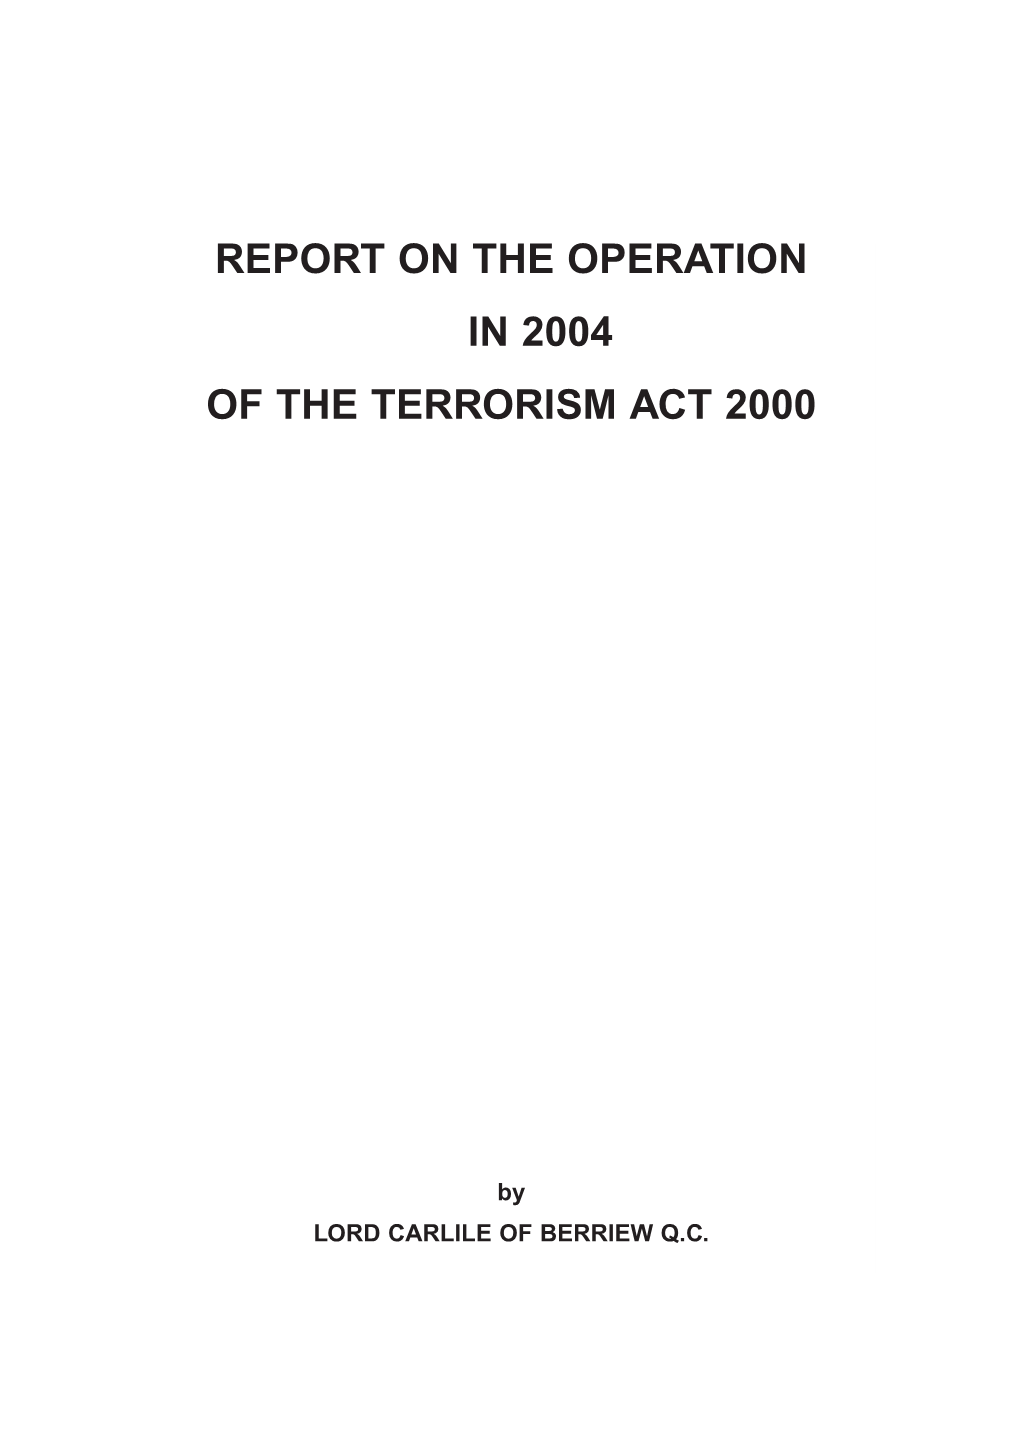 Report on the Operation in 2004 of the Terrorism Act 2000